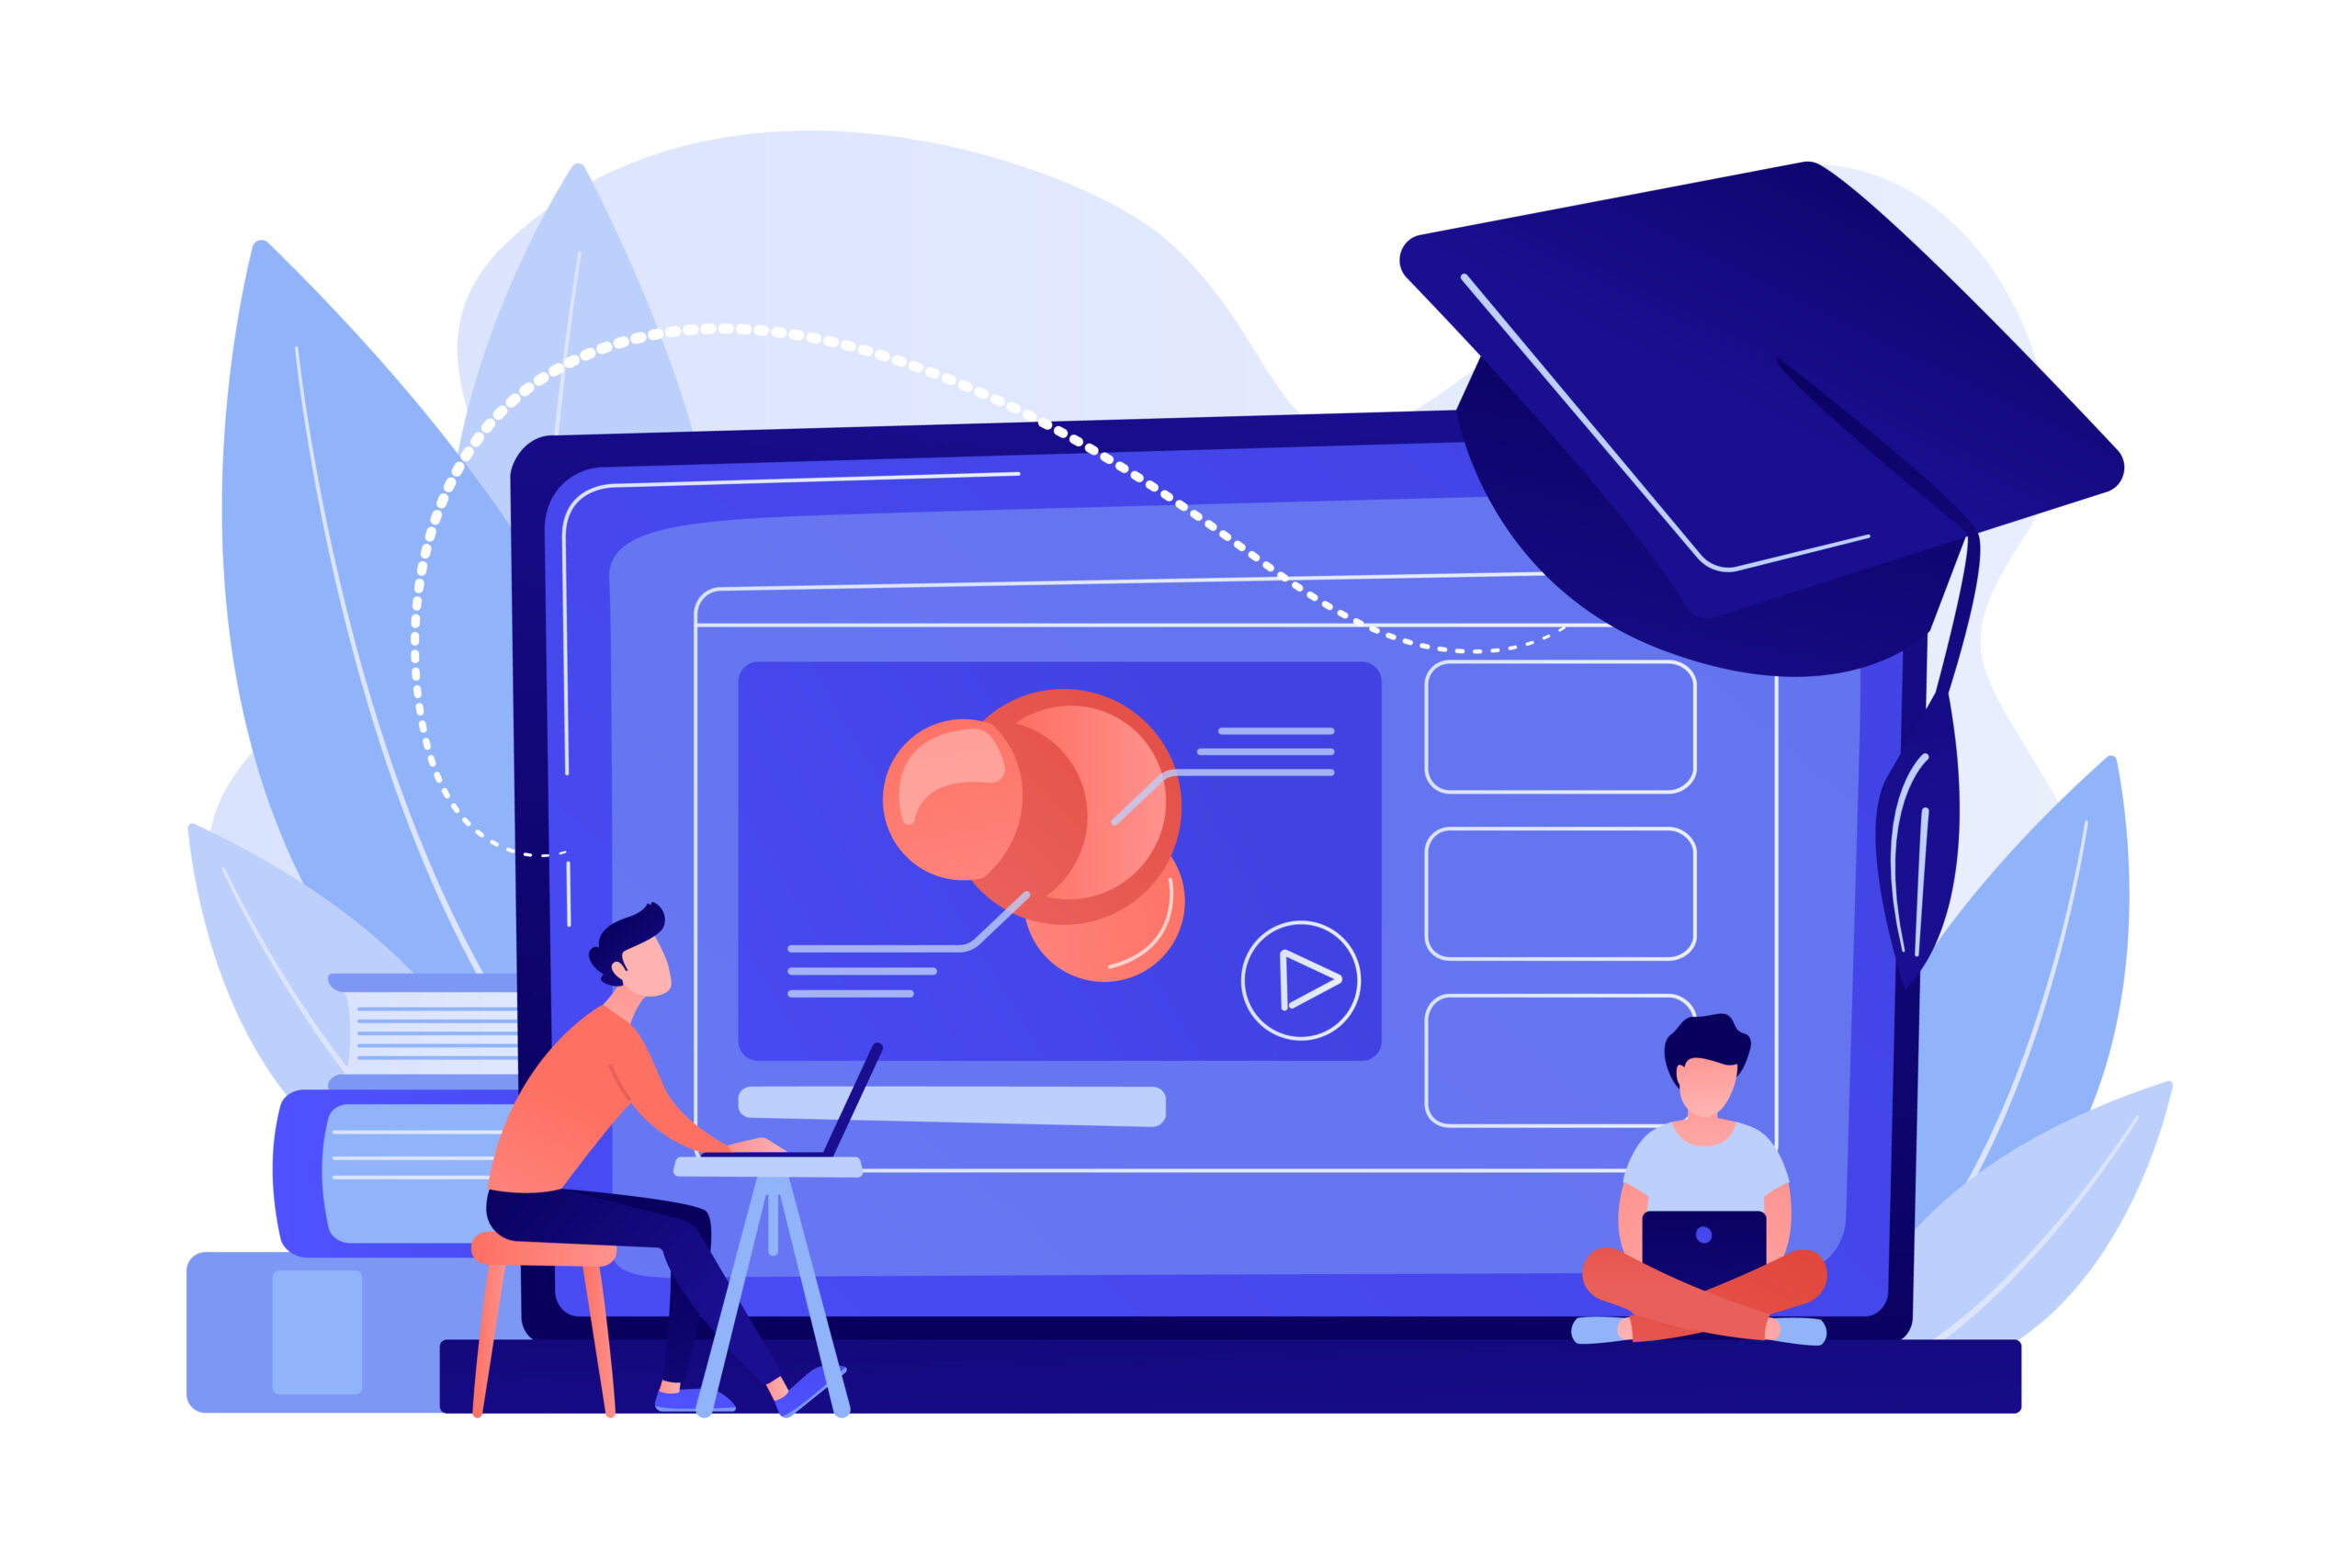 Students using e-learning platform video on laptop and graduation cap. Online education platform, e-learning platform, online teaching concept. Pinkish coral bluevector isolated illustration